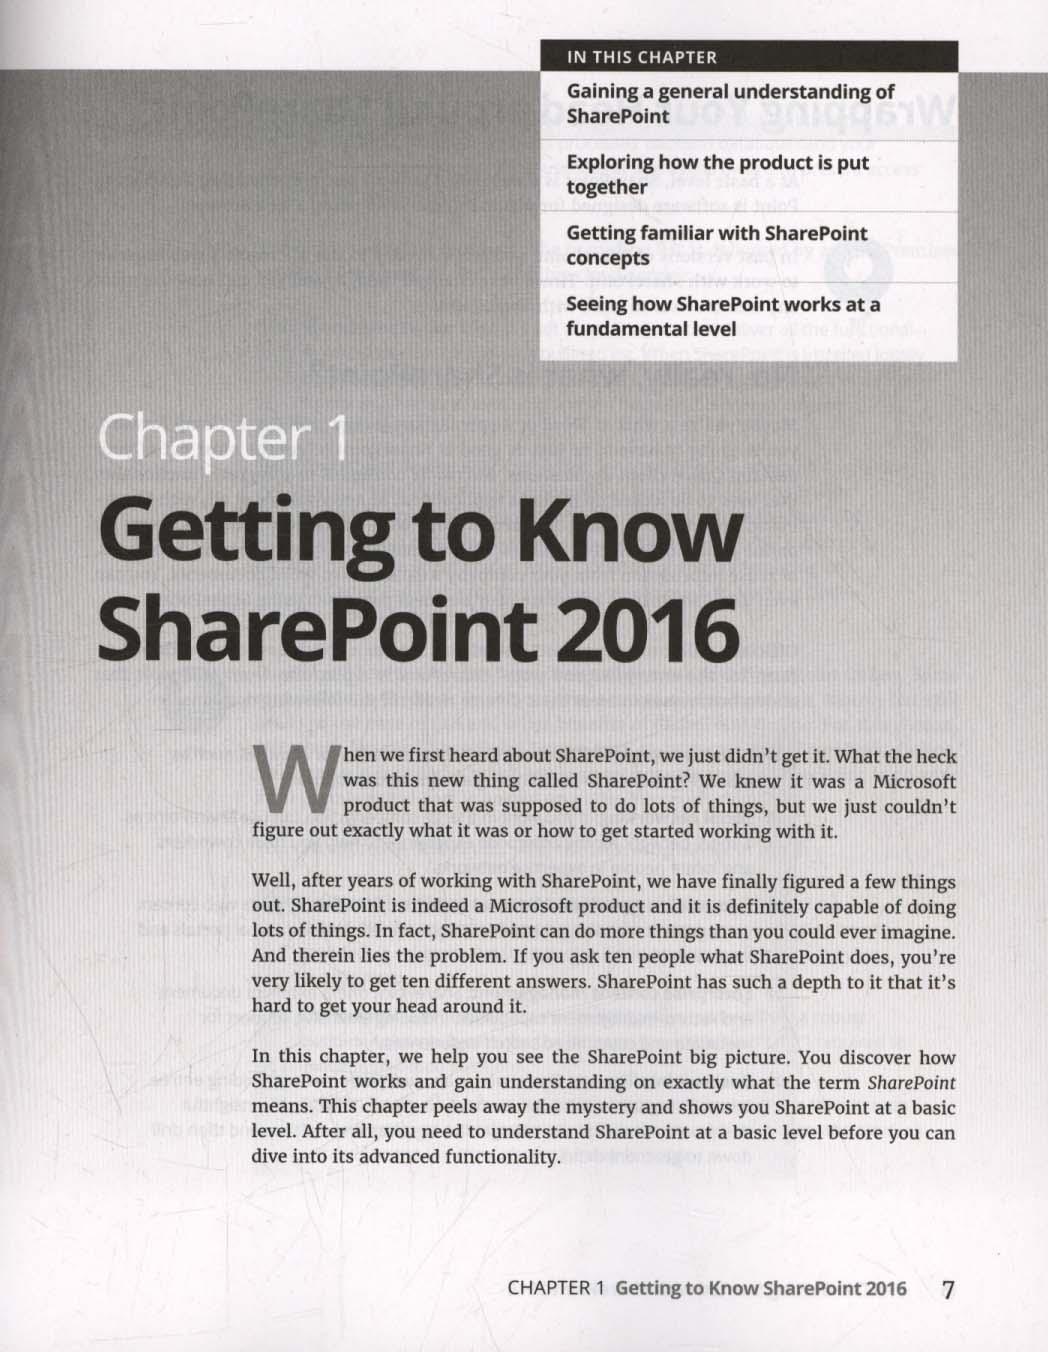 SharePoint 2016 For Dummies